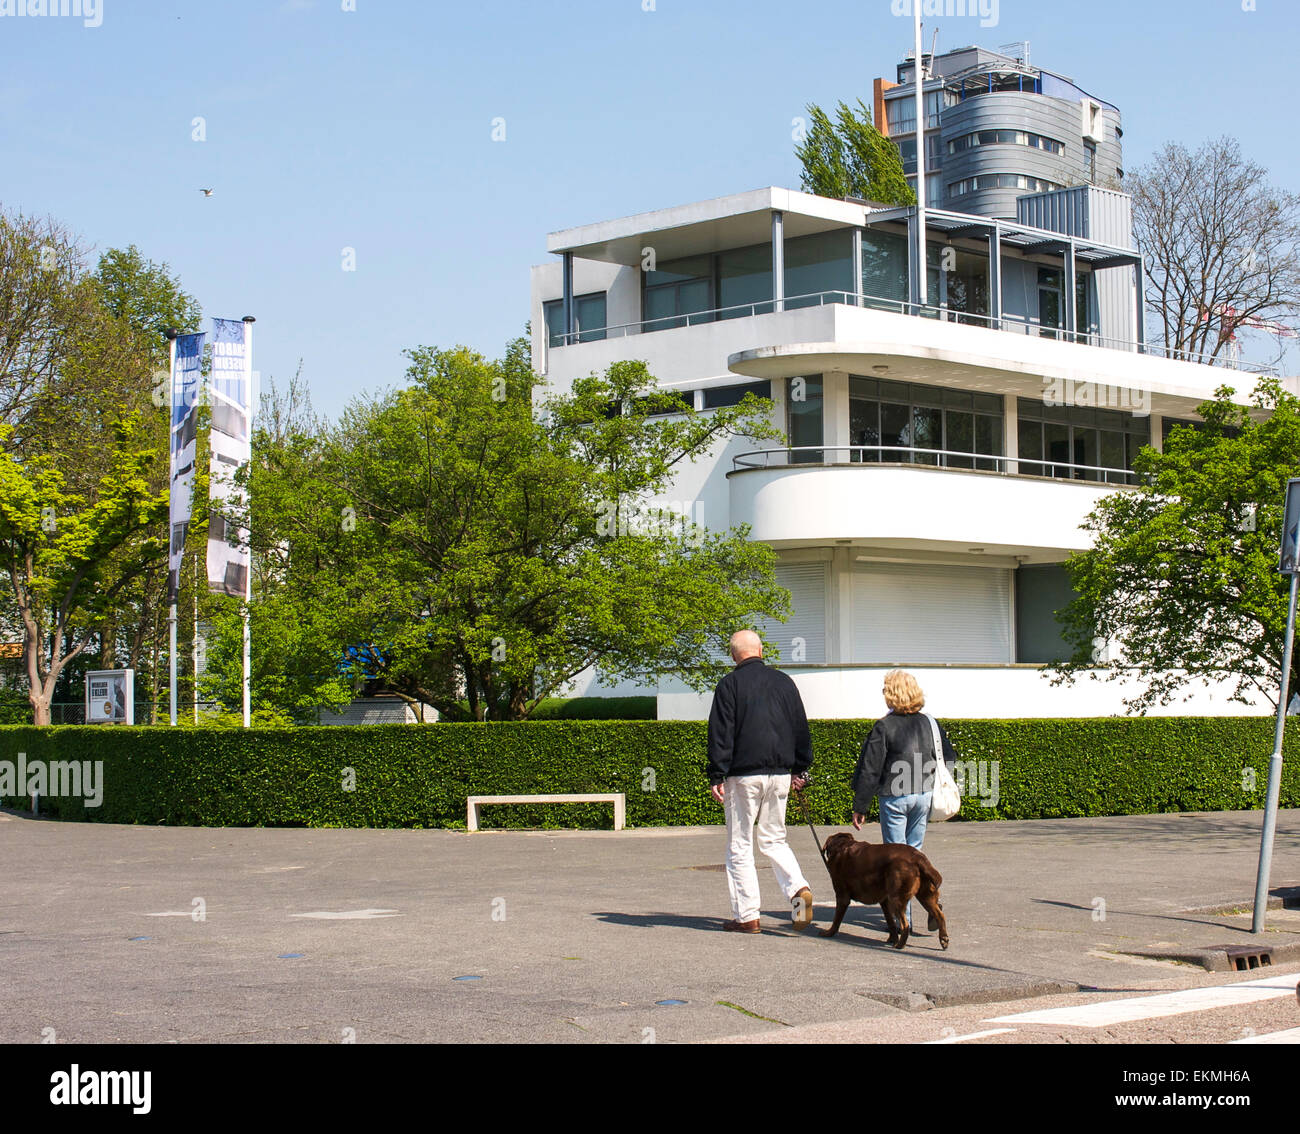 The Sonneveld House Museum in Rotterdam, Netherlands. This 1930s architectural museum is on the street named Museumpark. Stock Photo